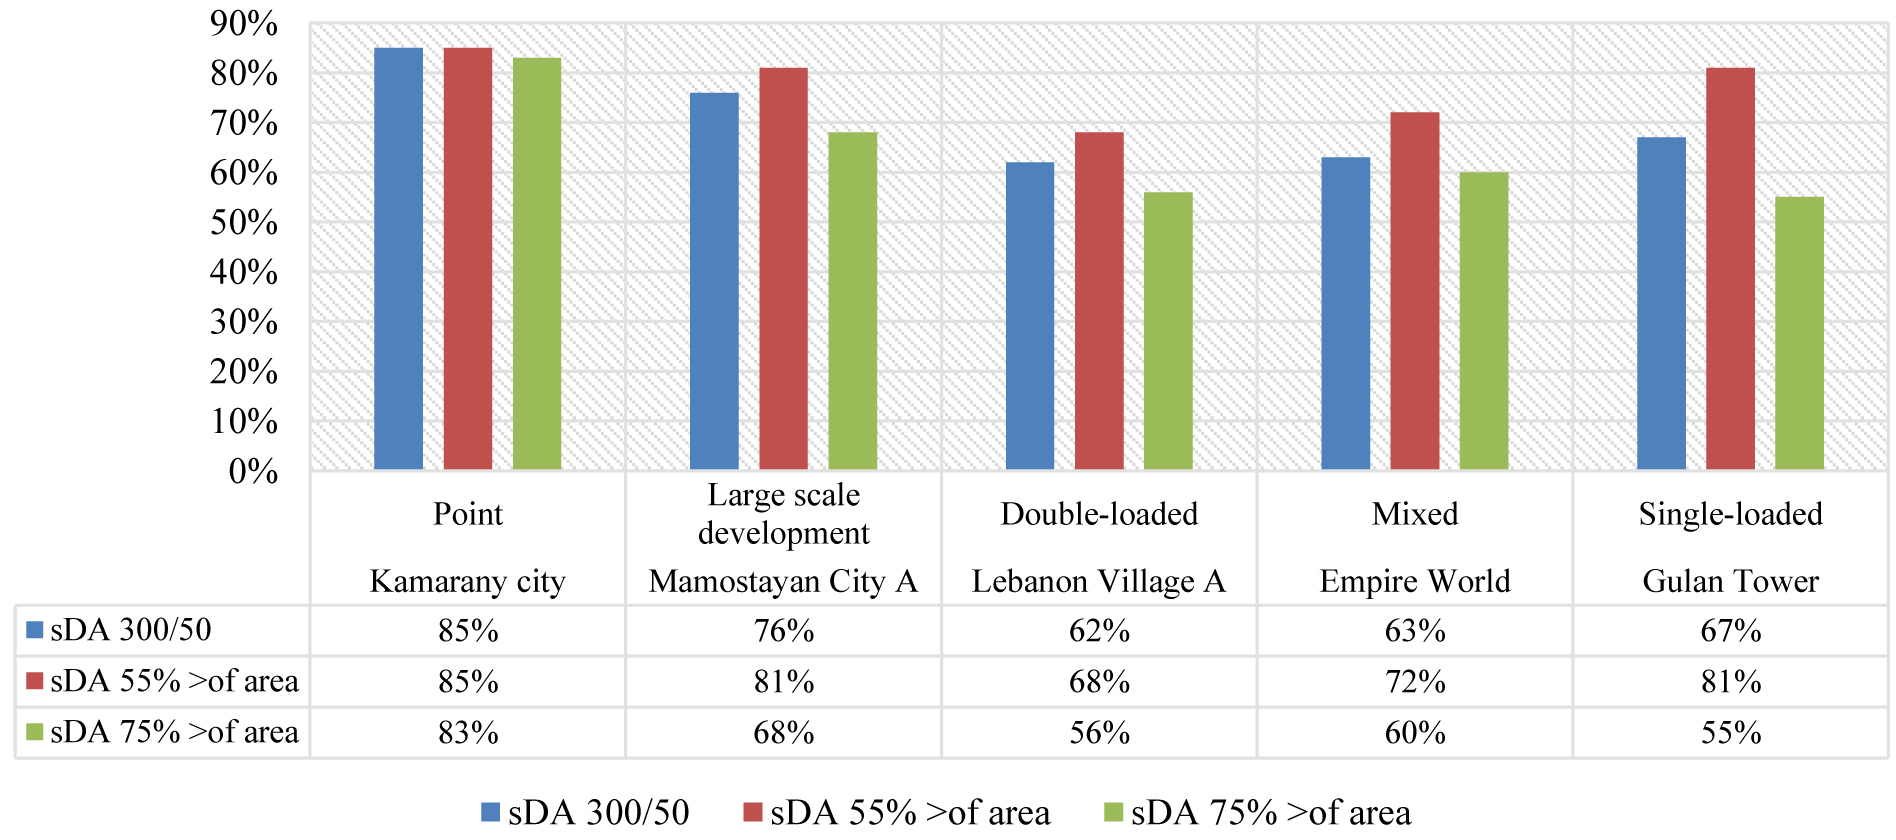 The average percentage of results for daylight autonomy (sDA) according to plan typologies.